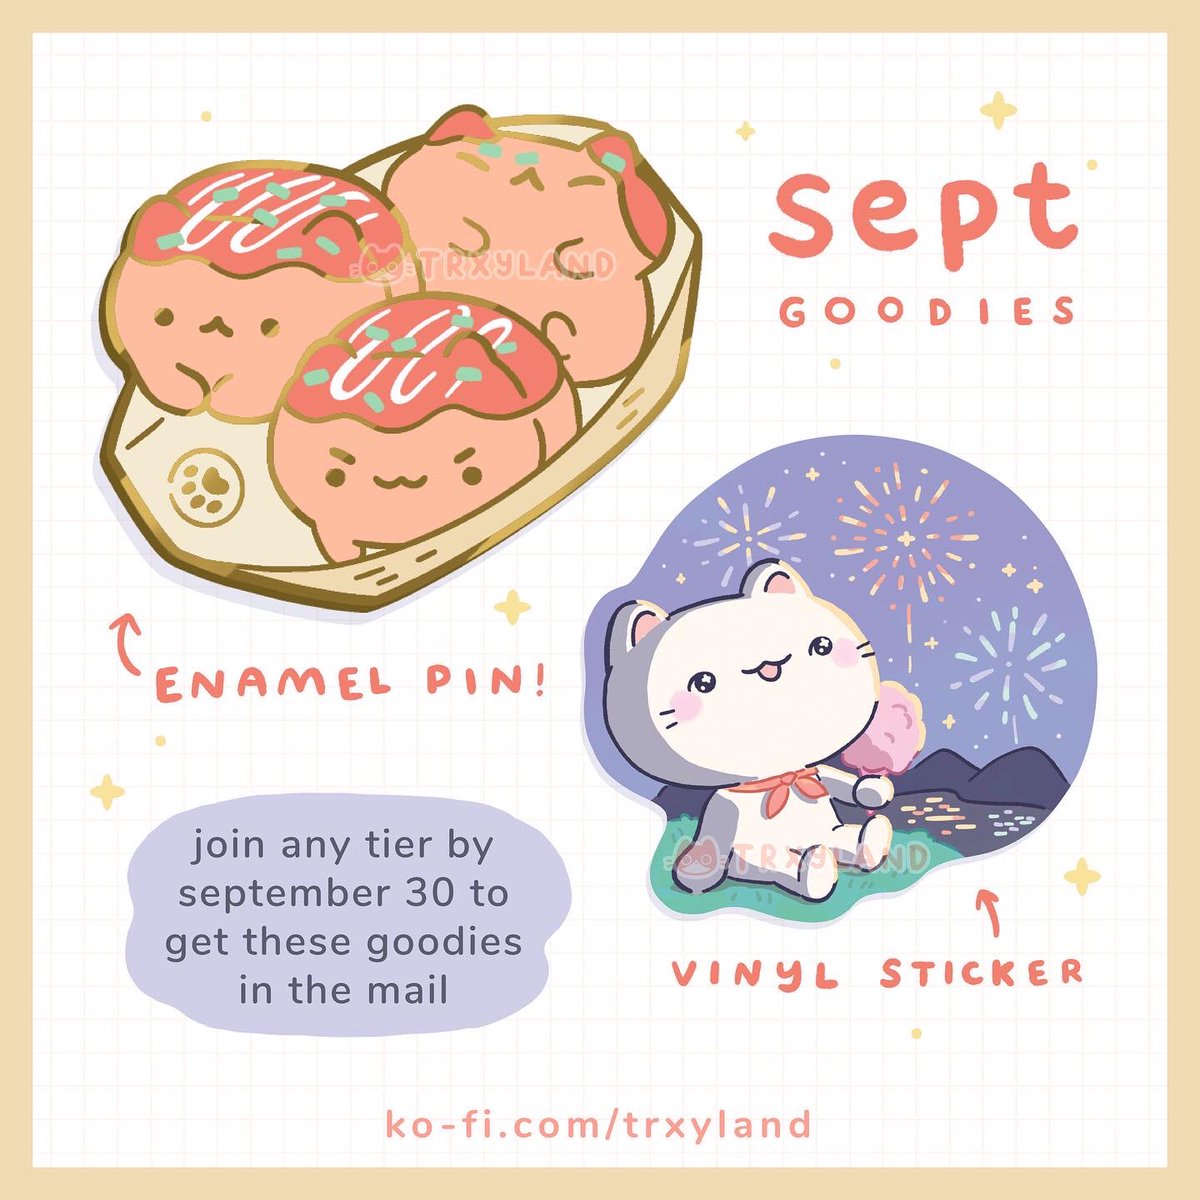 This month's goodies are inspired by good times with friends and food at the night market

Get them when you join any tier of my Pin Club before the end of Sep!

Link below 🔗 